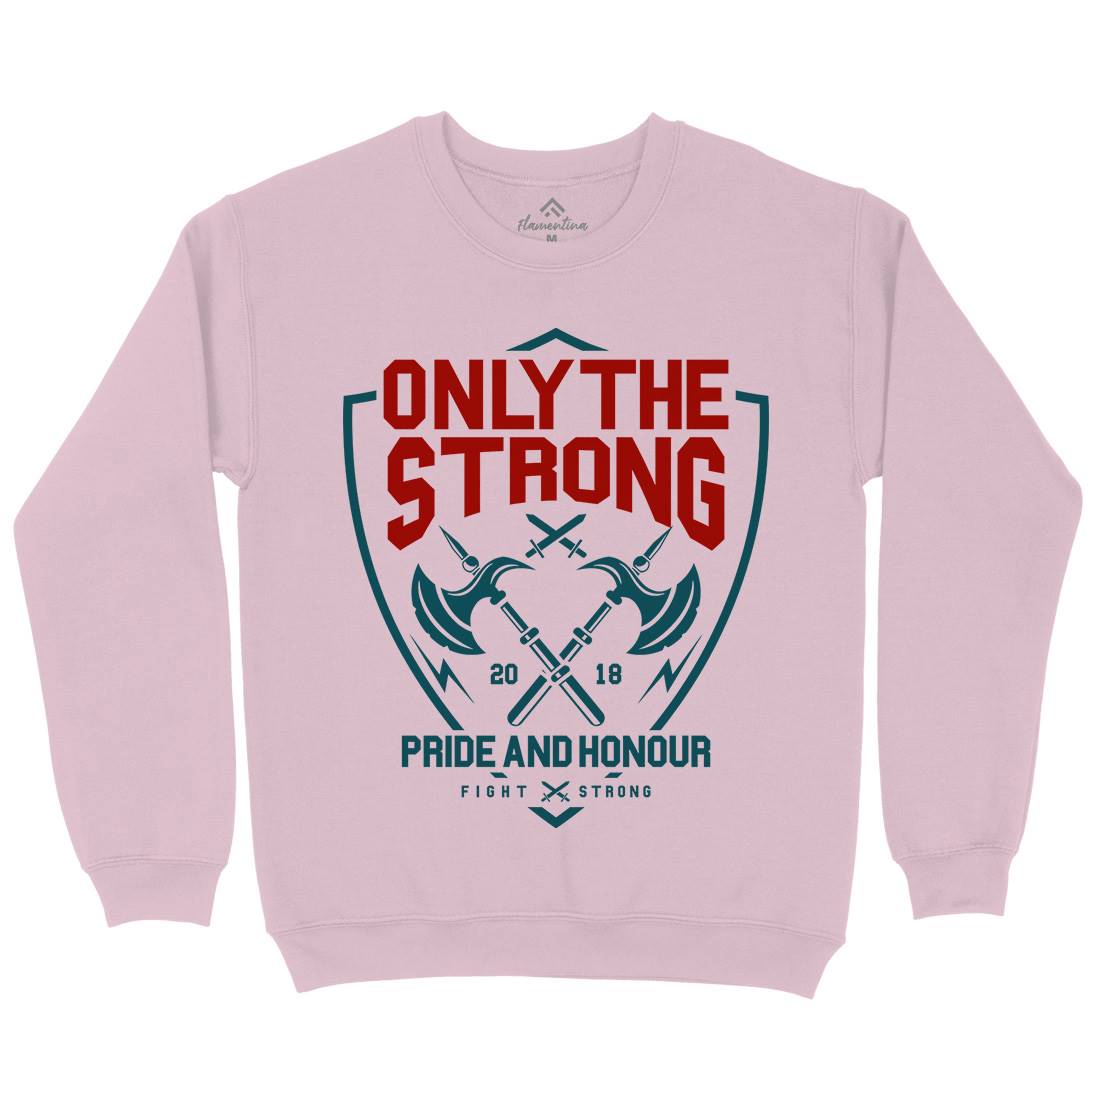 Only The Strong Kids Crew Neck Sweatshirt Quotes A257